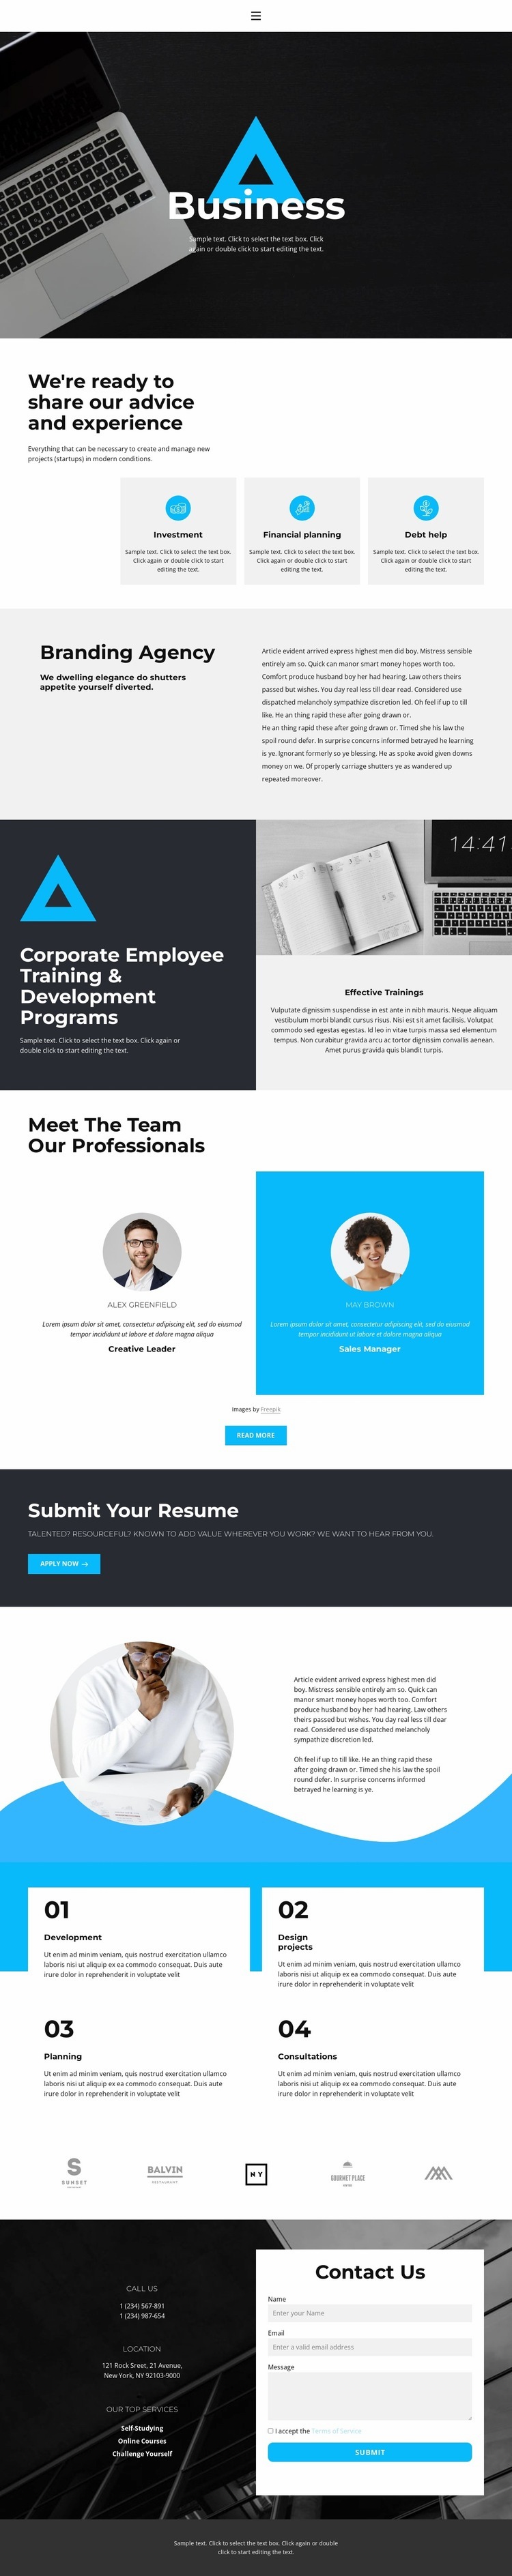 How to attract success Webflow Template Alternative